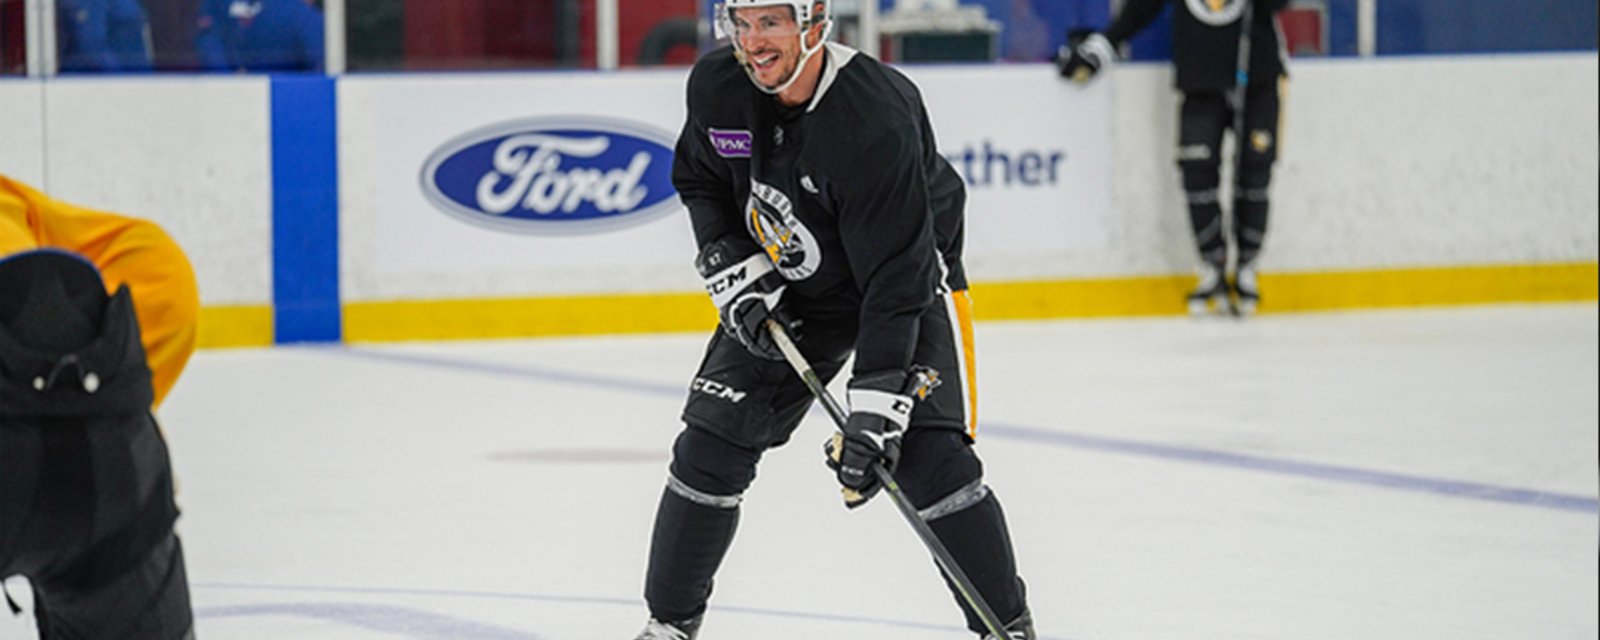 Injury concerns for Crosby as Penguins get ready to return to play